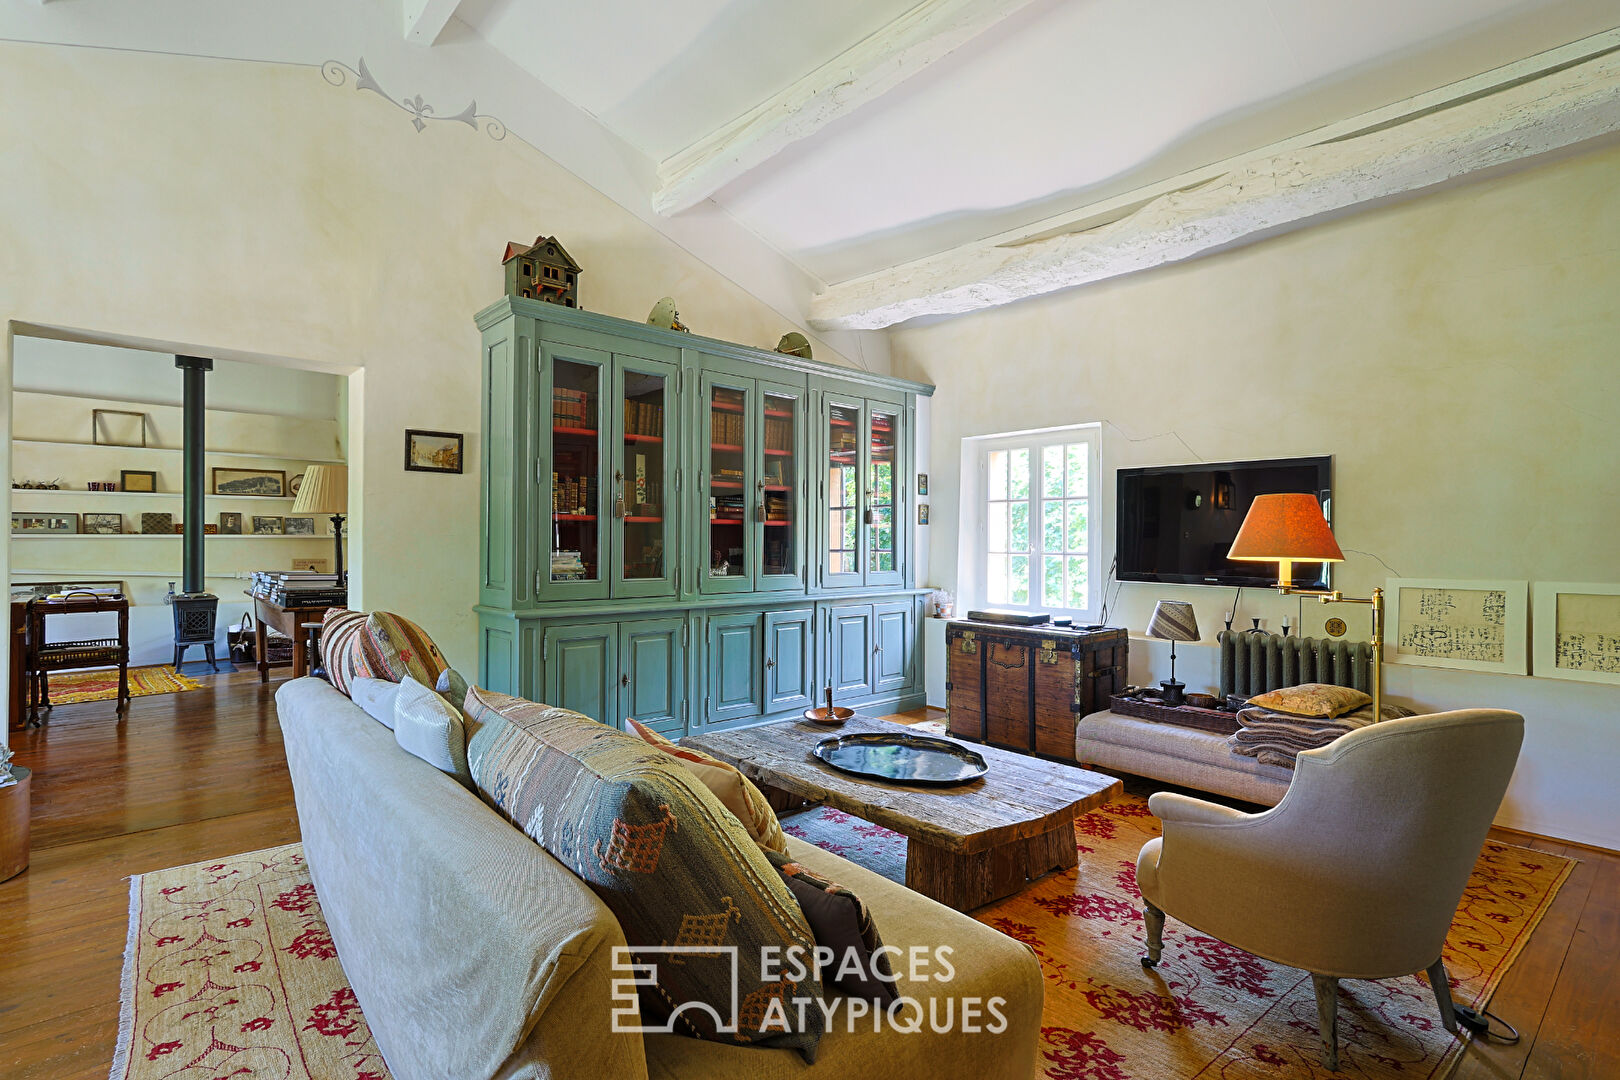 Charm and intimacy in the heart of the Var! Bastide with pond and pool house